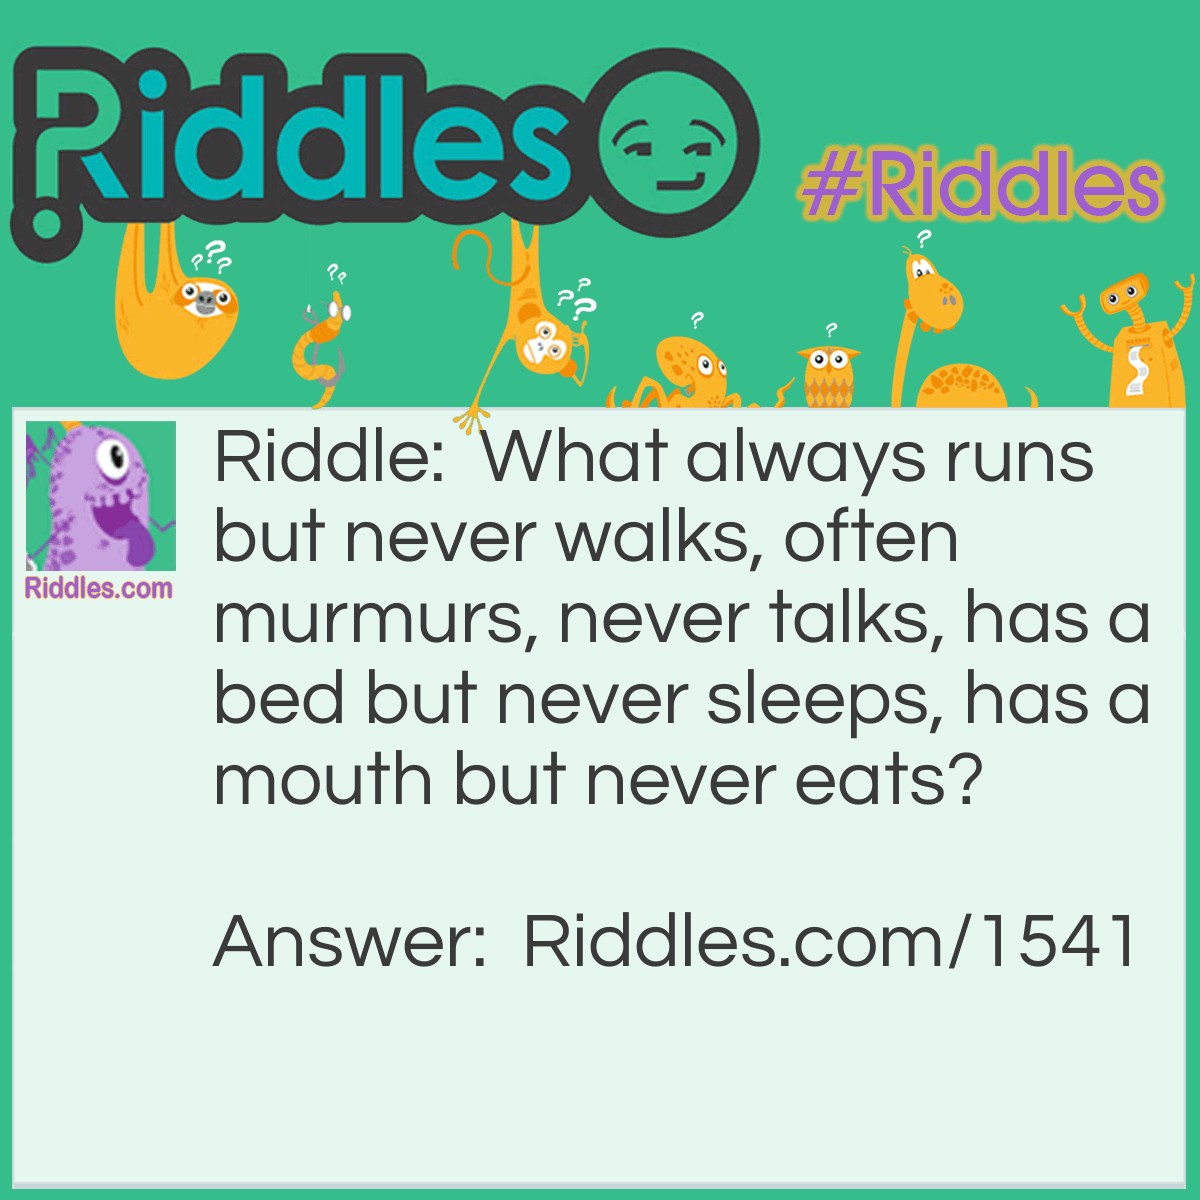 Riddle: What always runs but never walks, often murmurs, never talks, has a bed but never sleeps, has a mouth but never eats? Answer: A River.